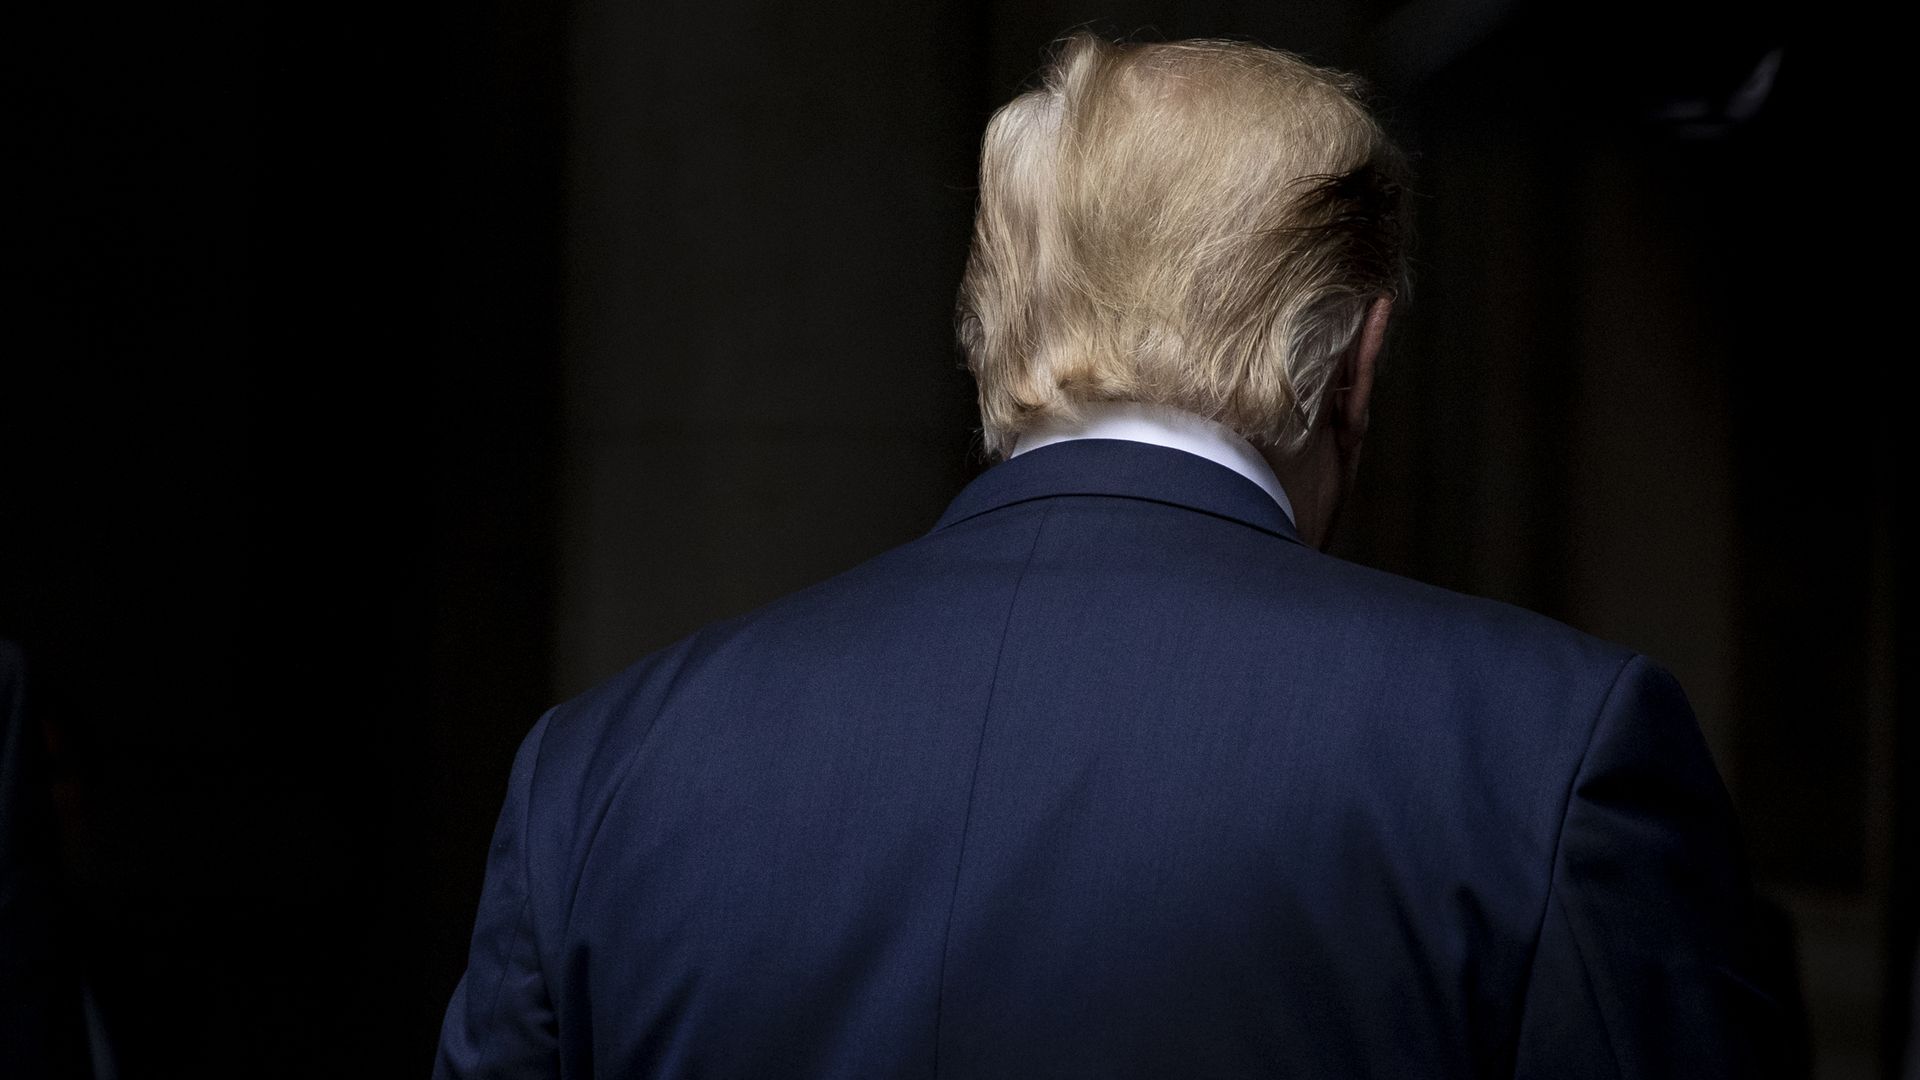 This image shows the back of Trump's head. He's wearing a suit.